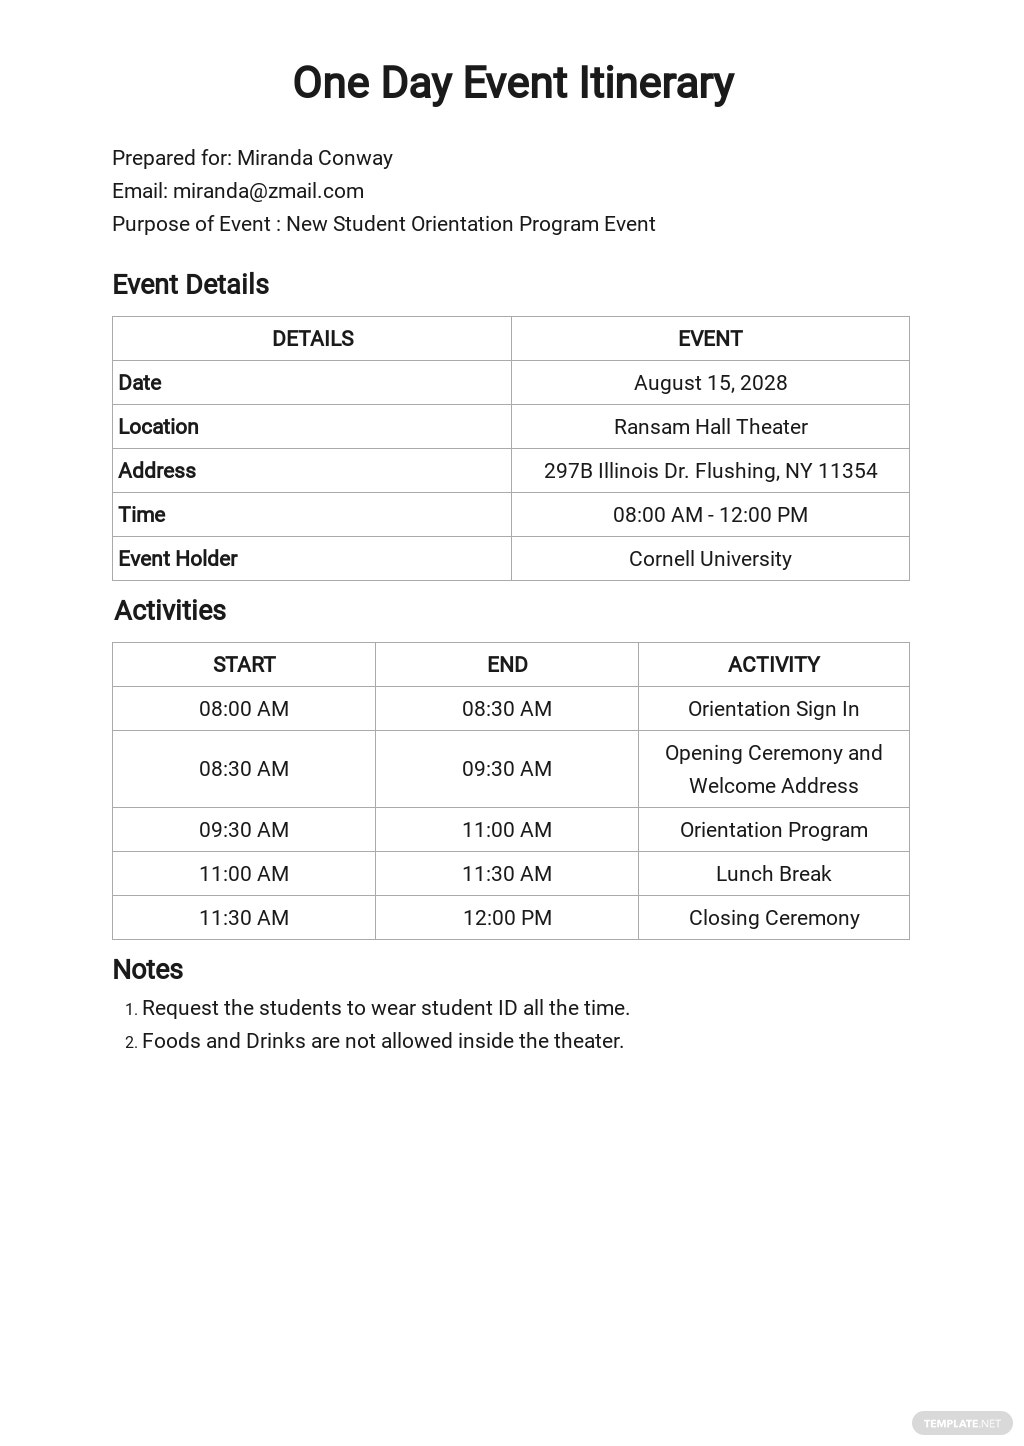 One Day Event Itinerary Template [Free PDF] - Google Docs, Word  With Regard To Itinerary Template For Event Within Itinerary Template For Event